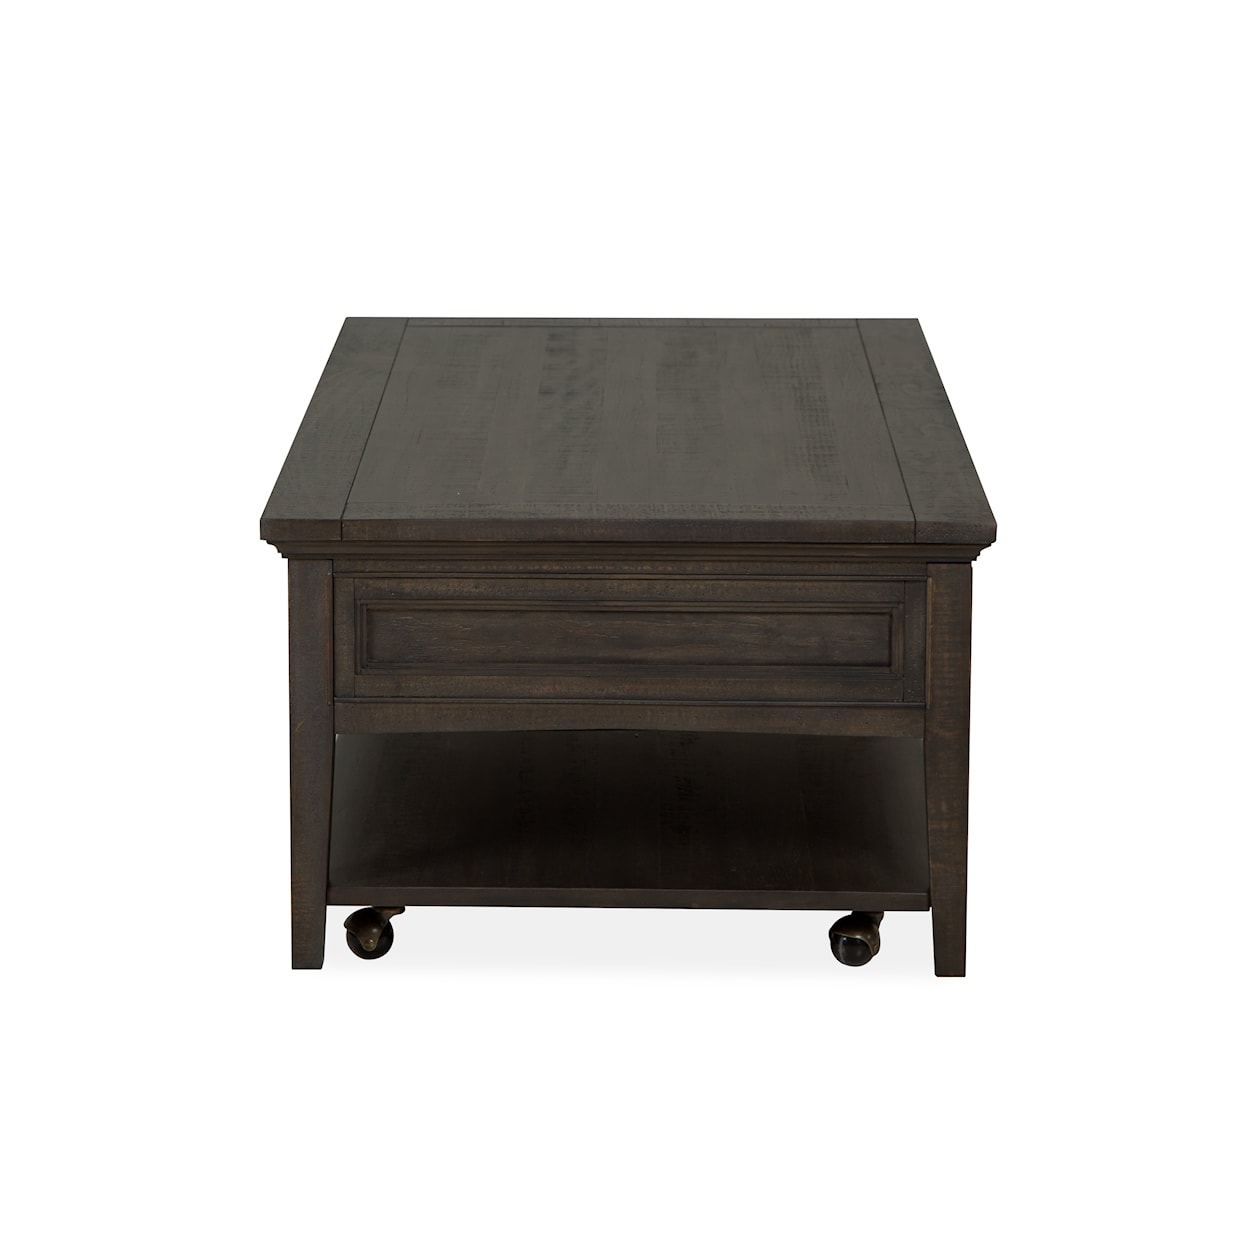 Magnussen Home Westley Falls Occasional Tables Rectangular Cocktail Table